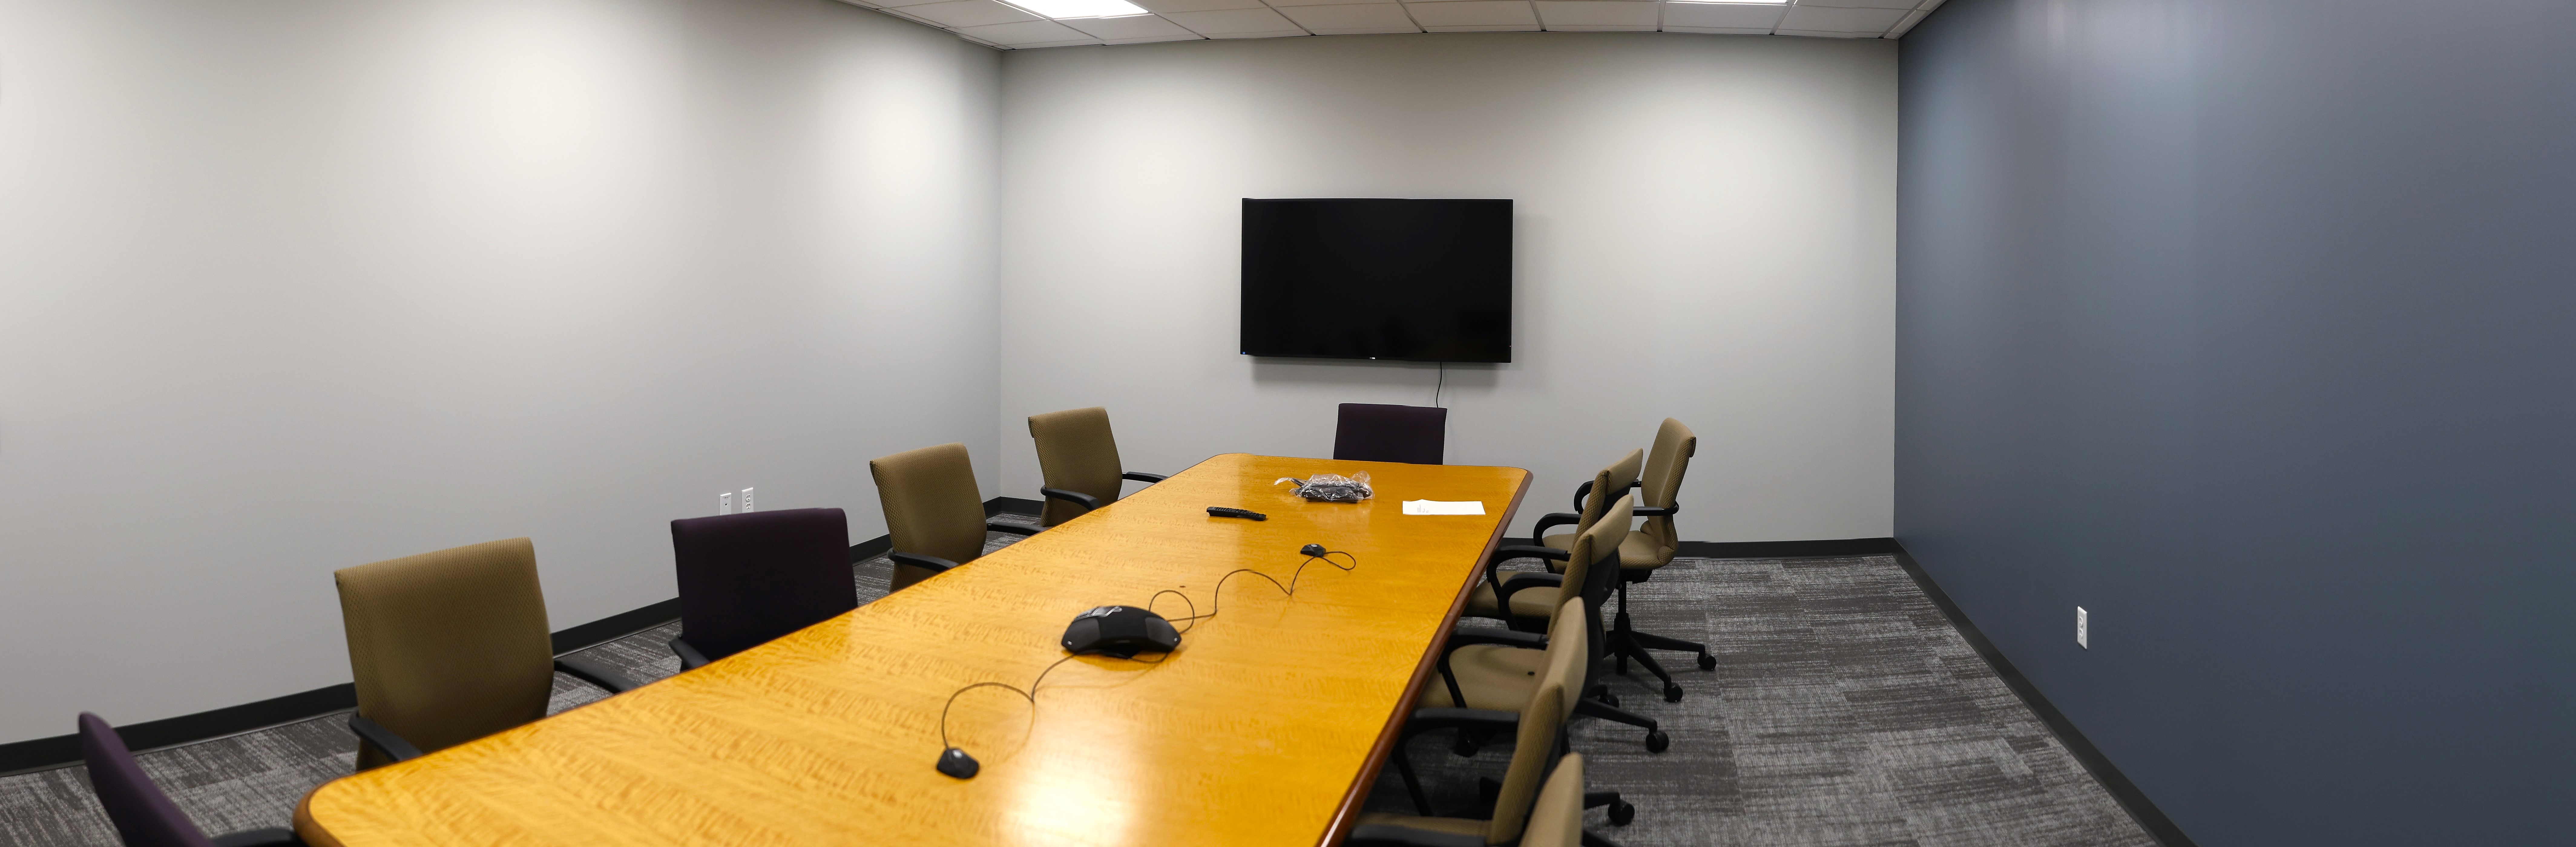 Council-Meeting-Room-with-TV-installed